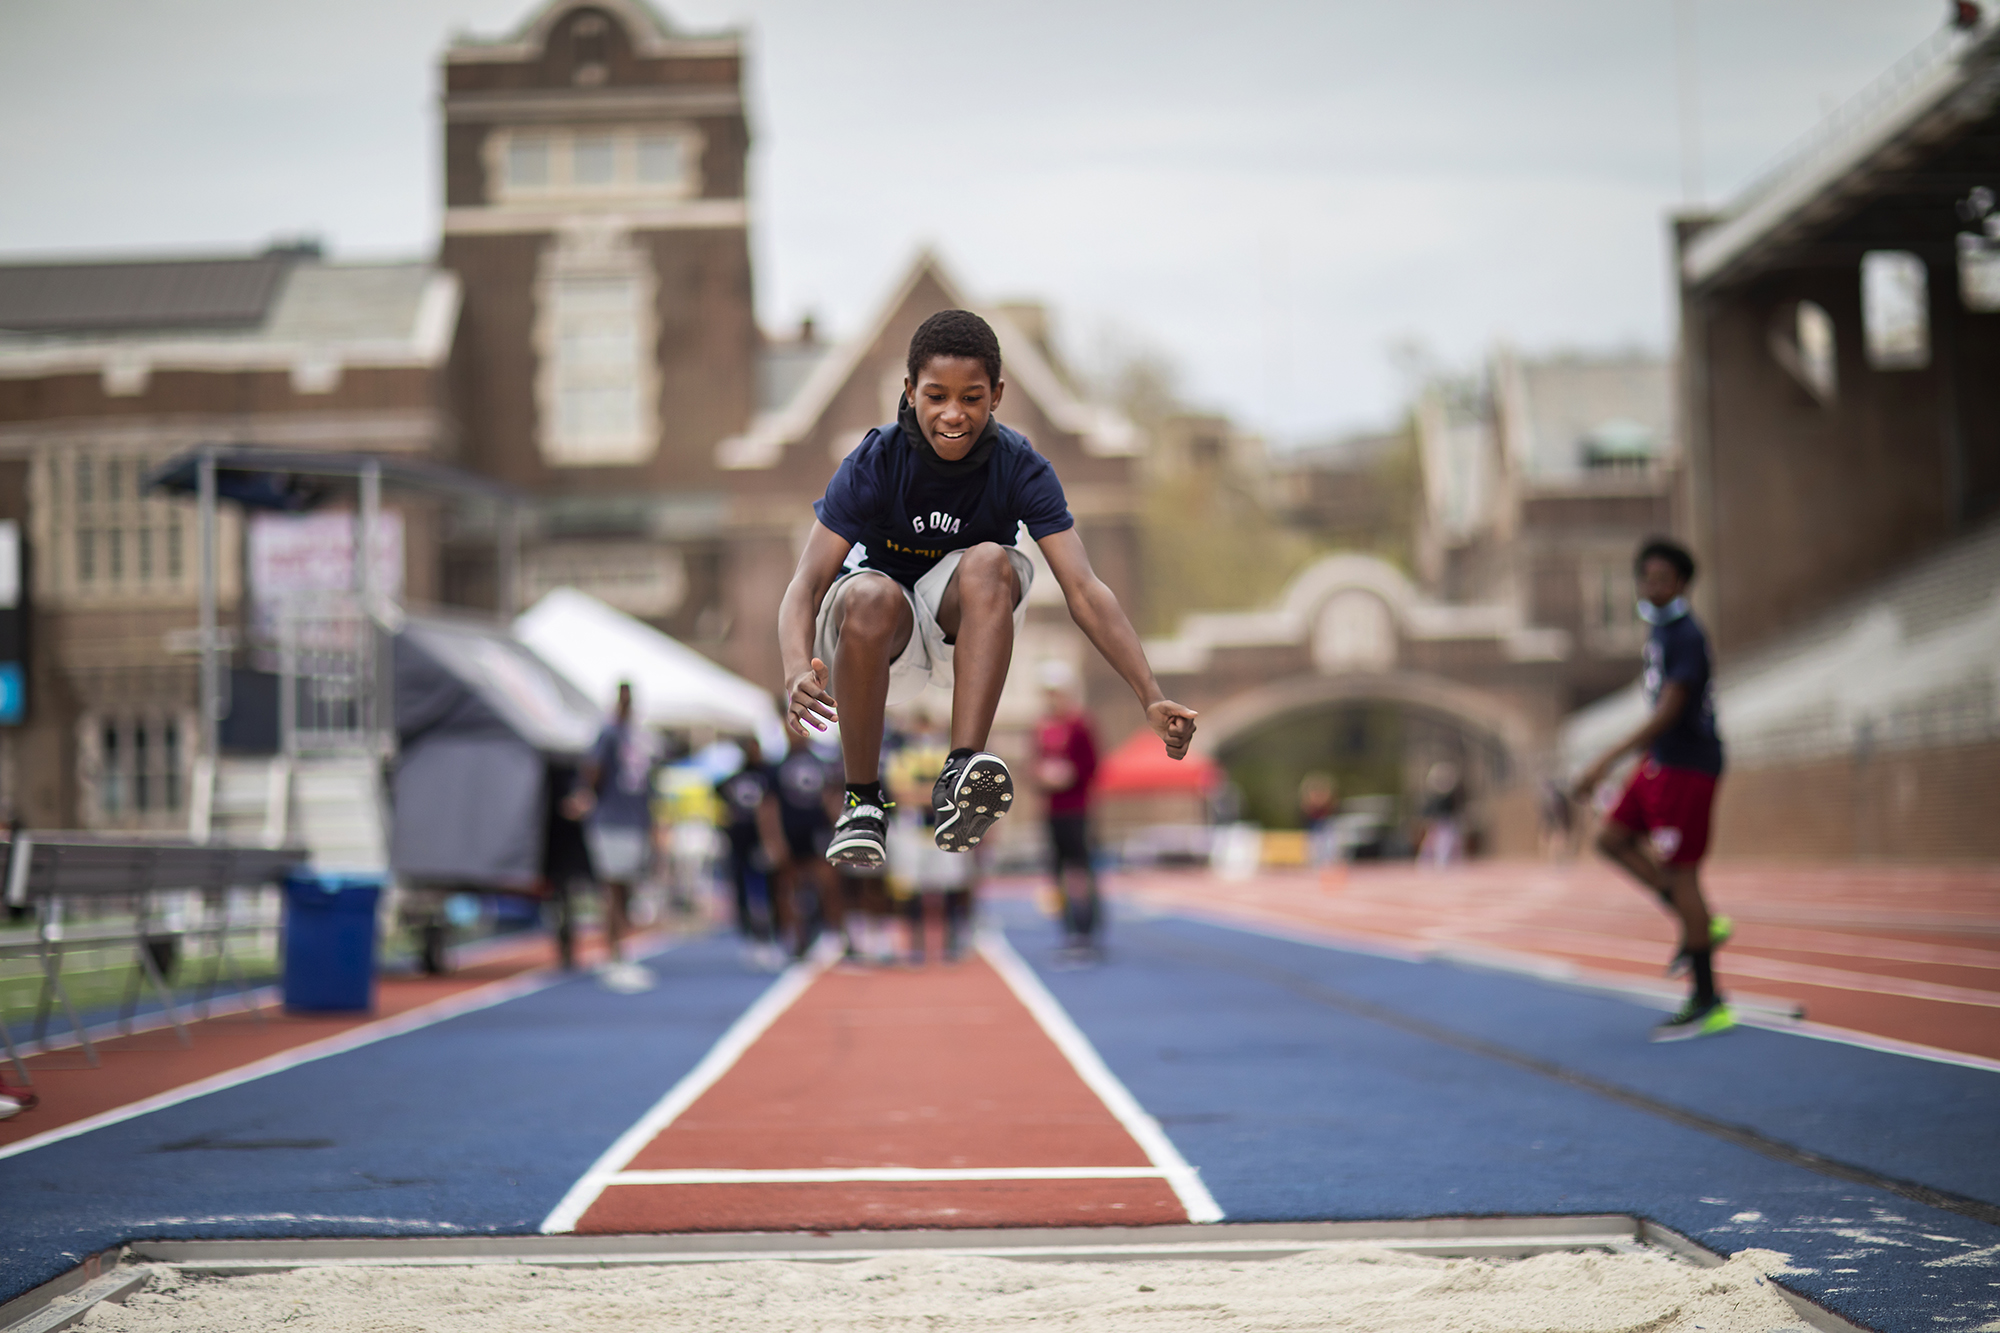 A student is airborne, in the midst of his long jump